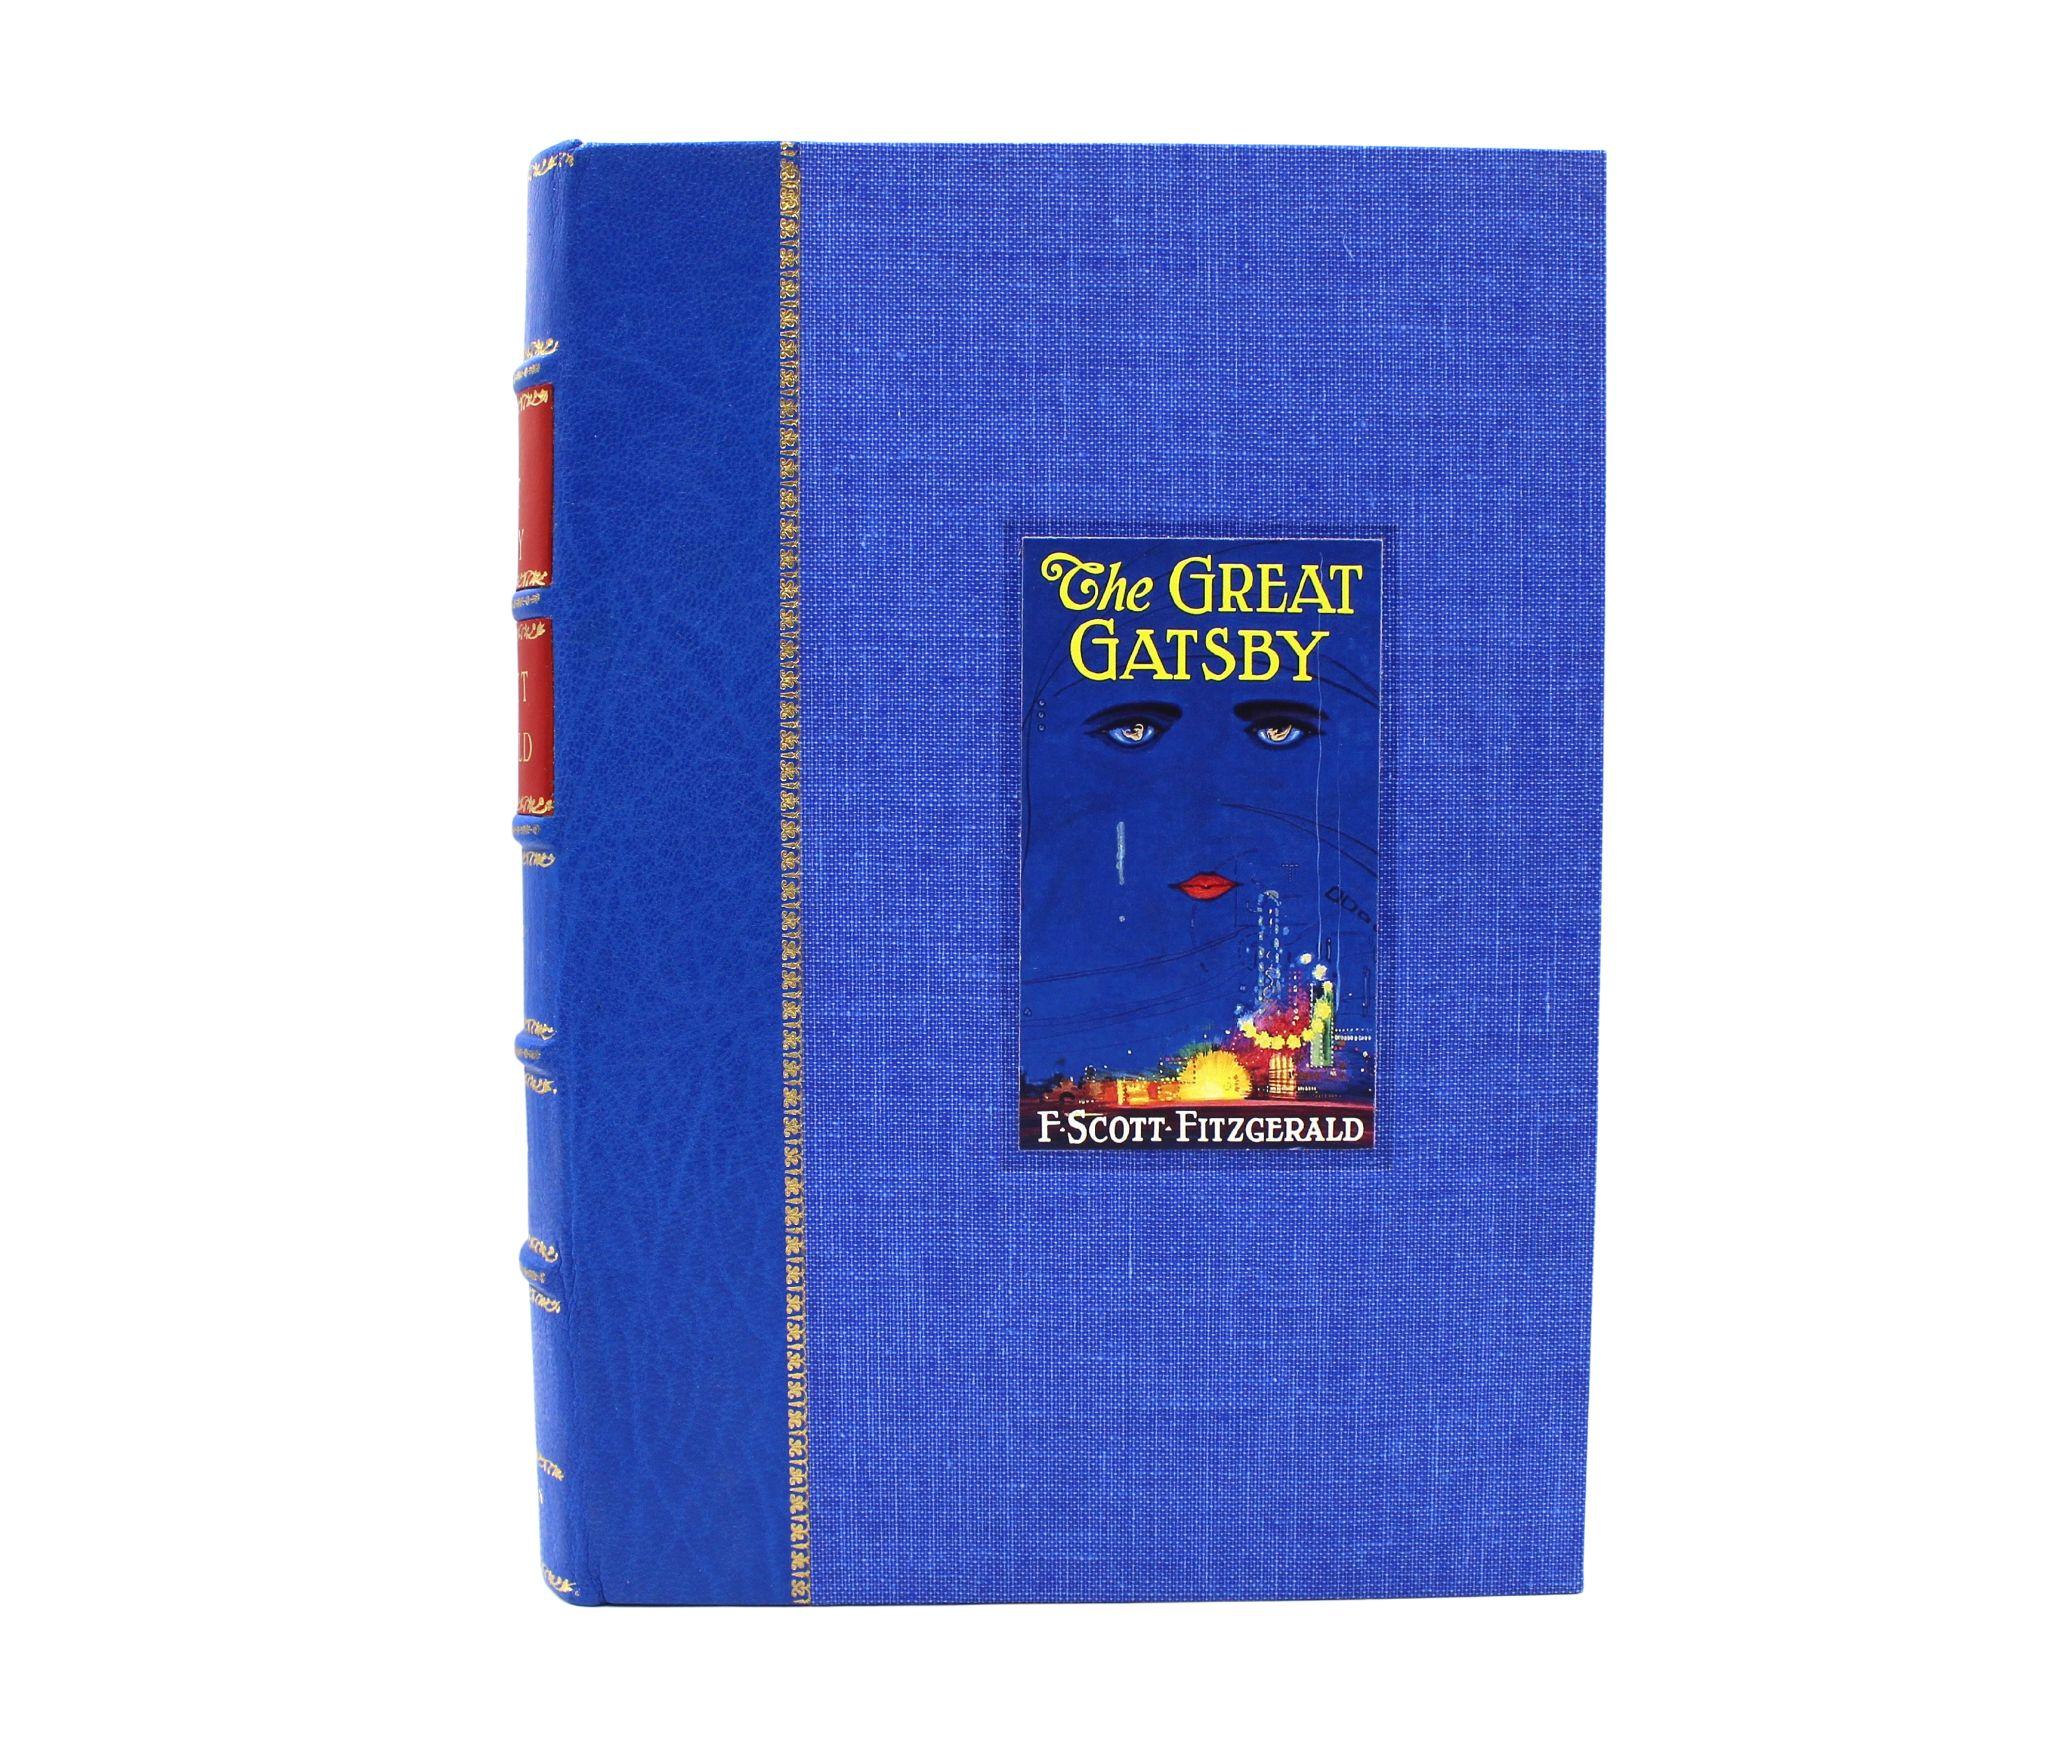 The Great Gatsby by F. Scott Fitzgerald, First Edition, First Issue, 1925 For Sale 5